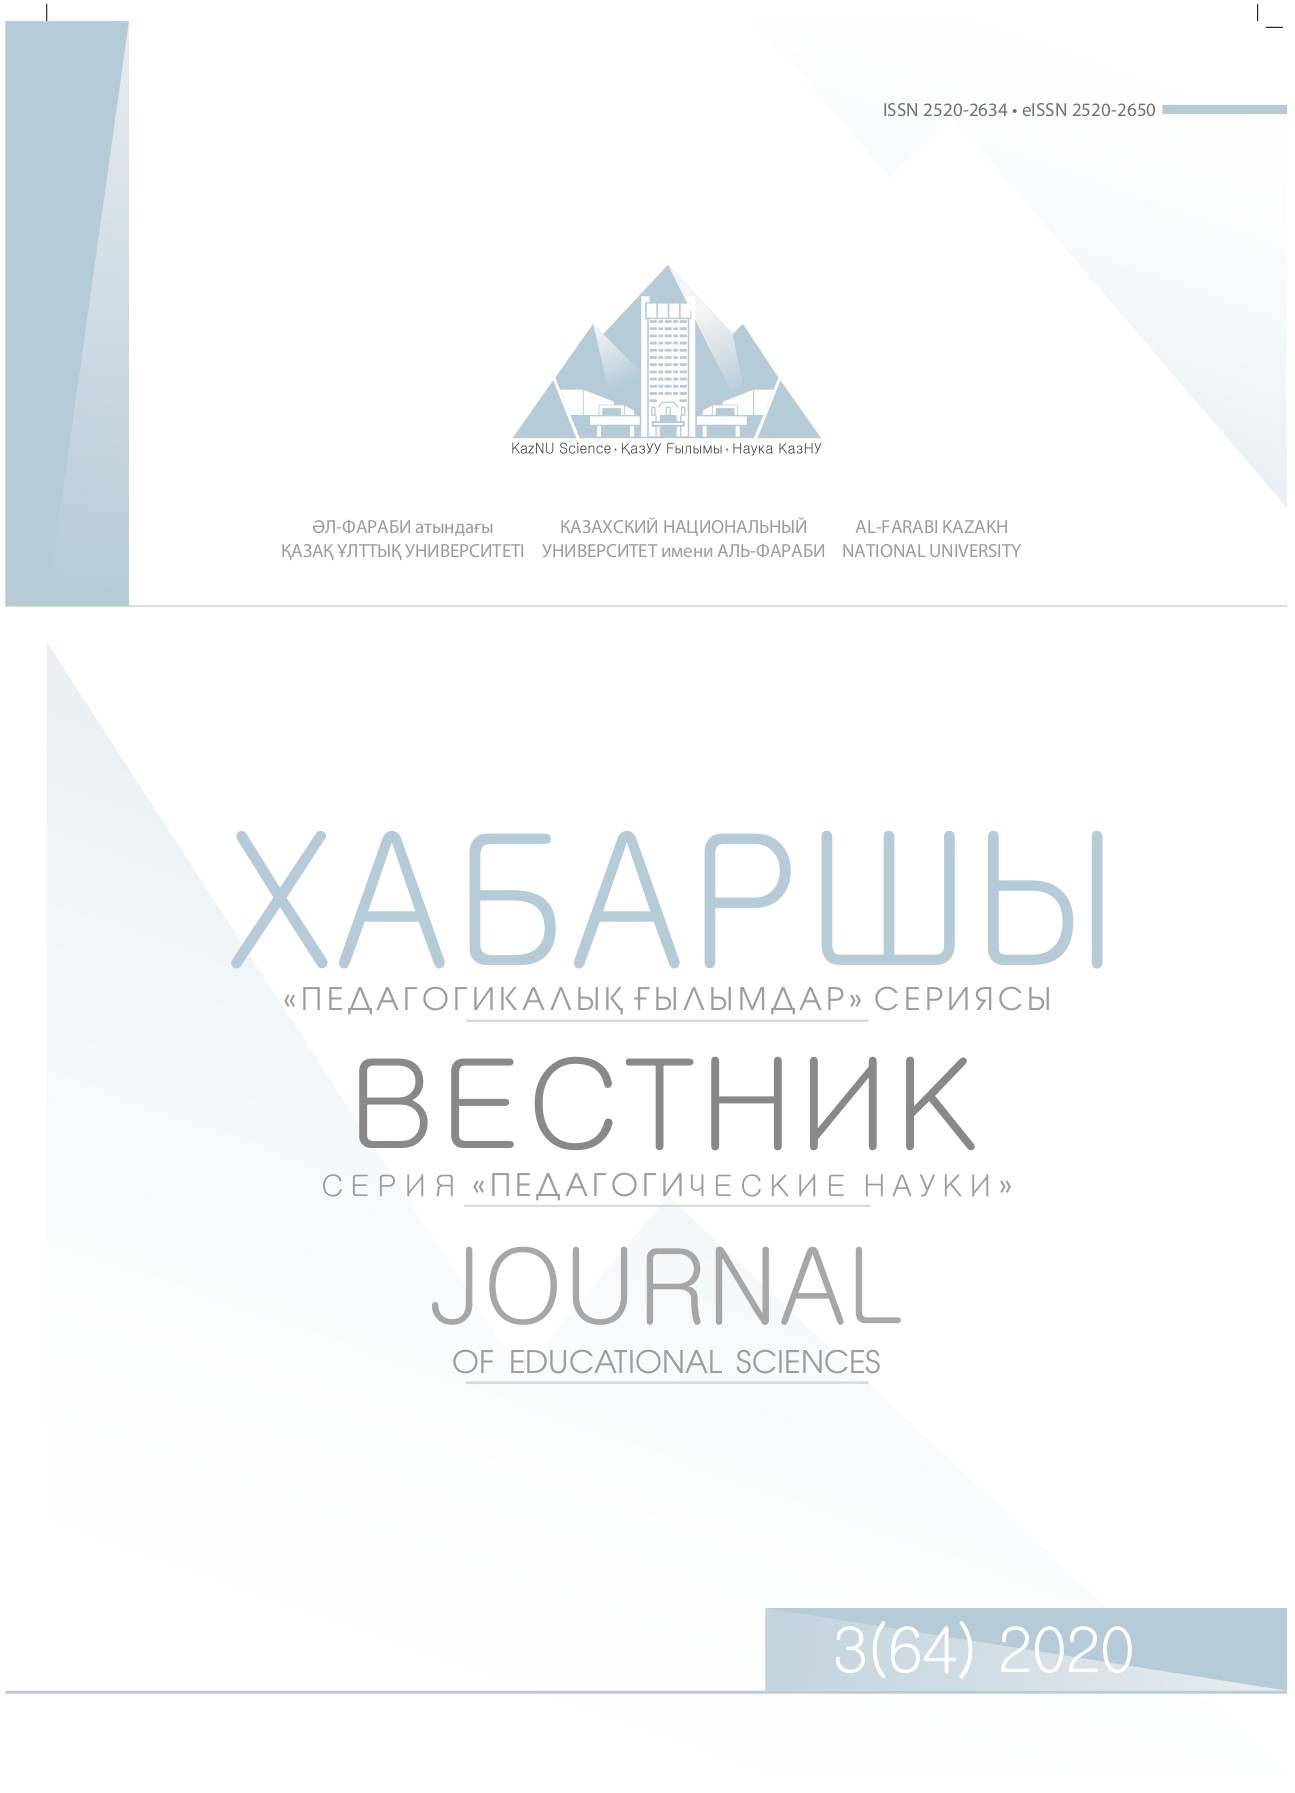 					View Vol. 64 No. 3 (2020): JOURNAL of Educational Sciences
				